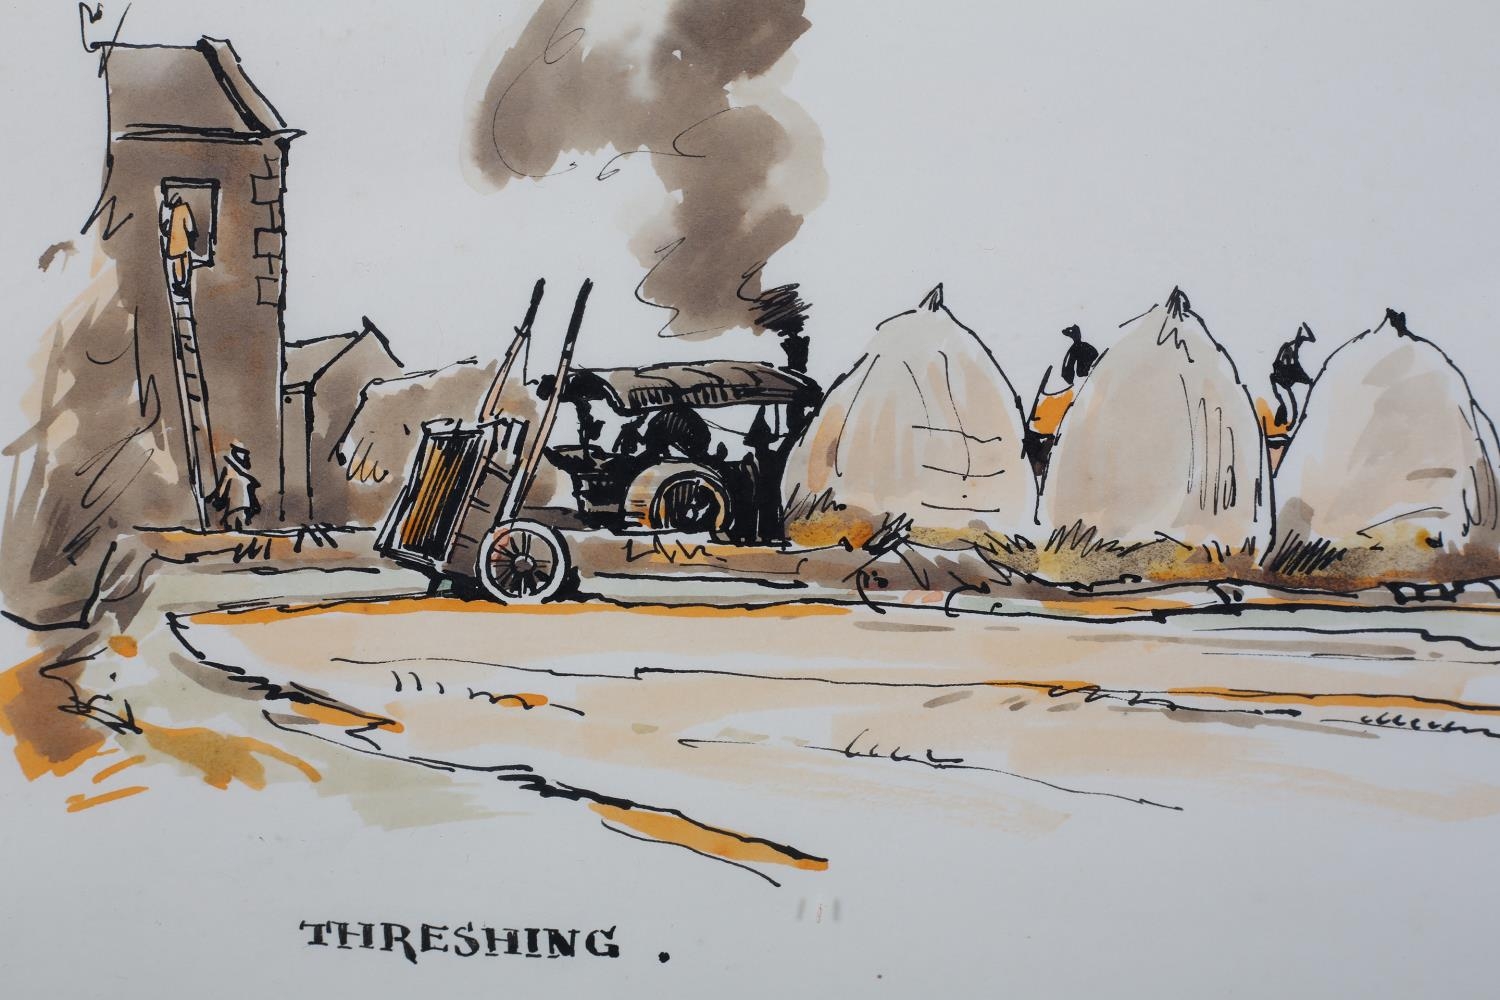 ARR FRED LAWSON (1888-1968), Threshing no. 83 from the artist's 'Book of Drawings' 1935, - Image 3 of 4